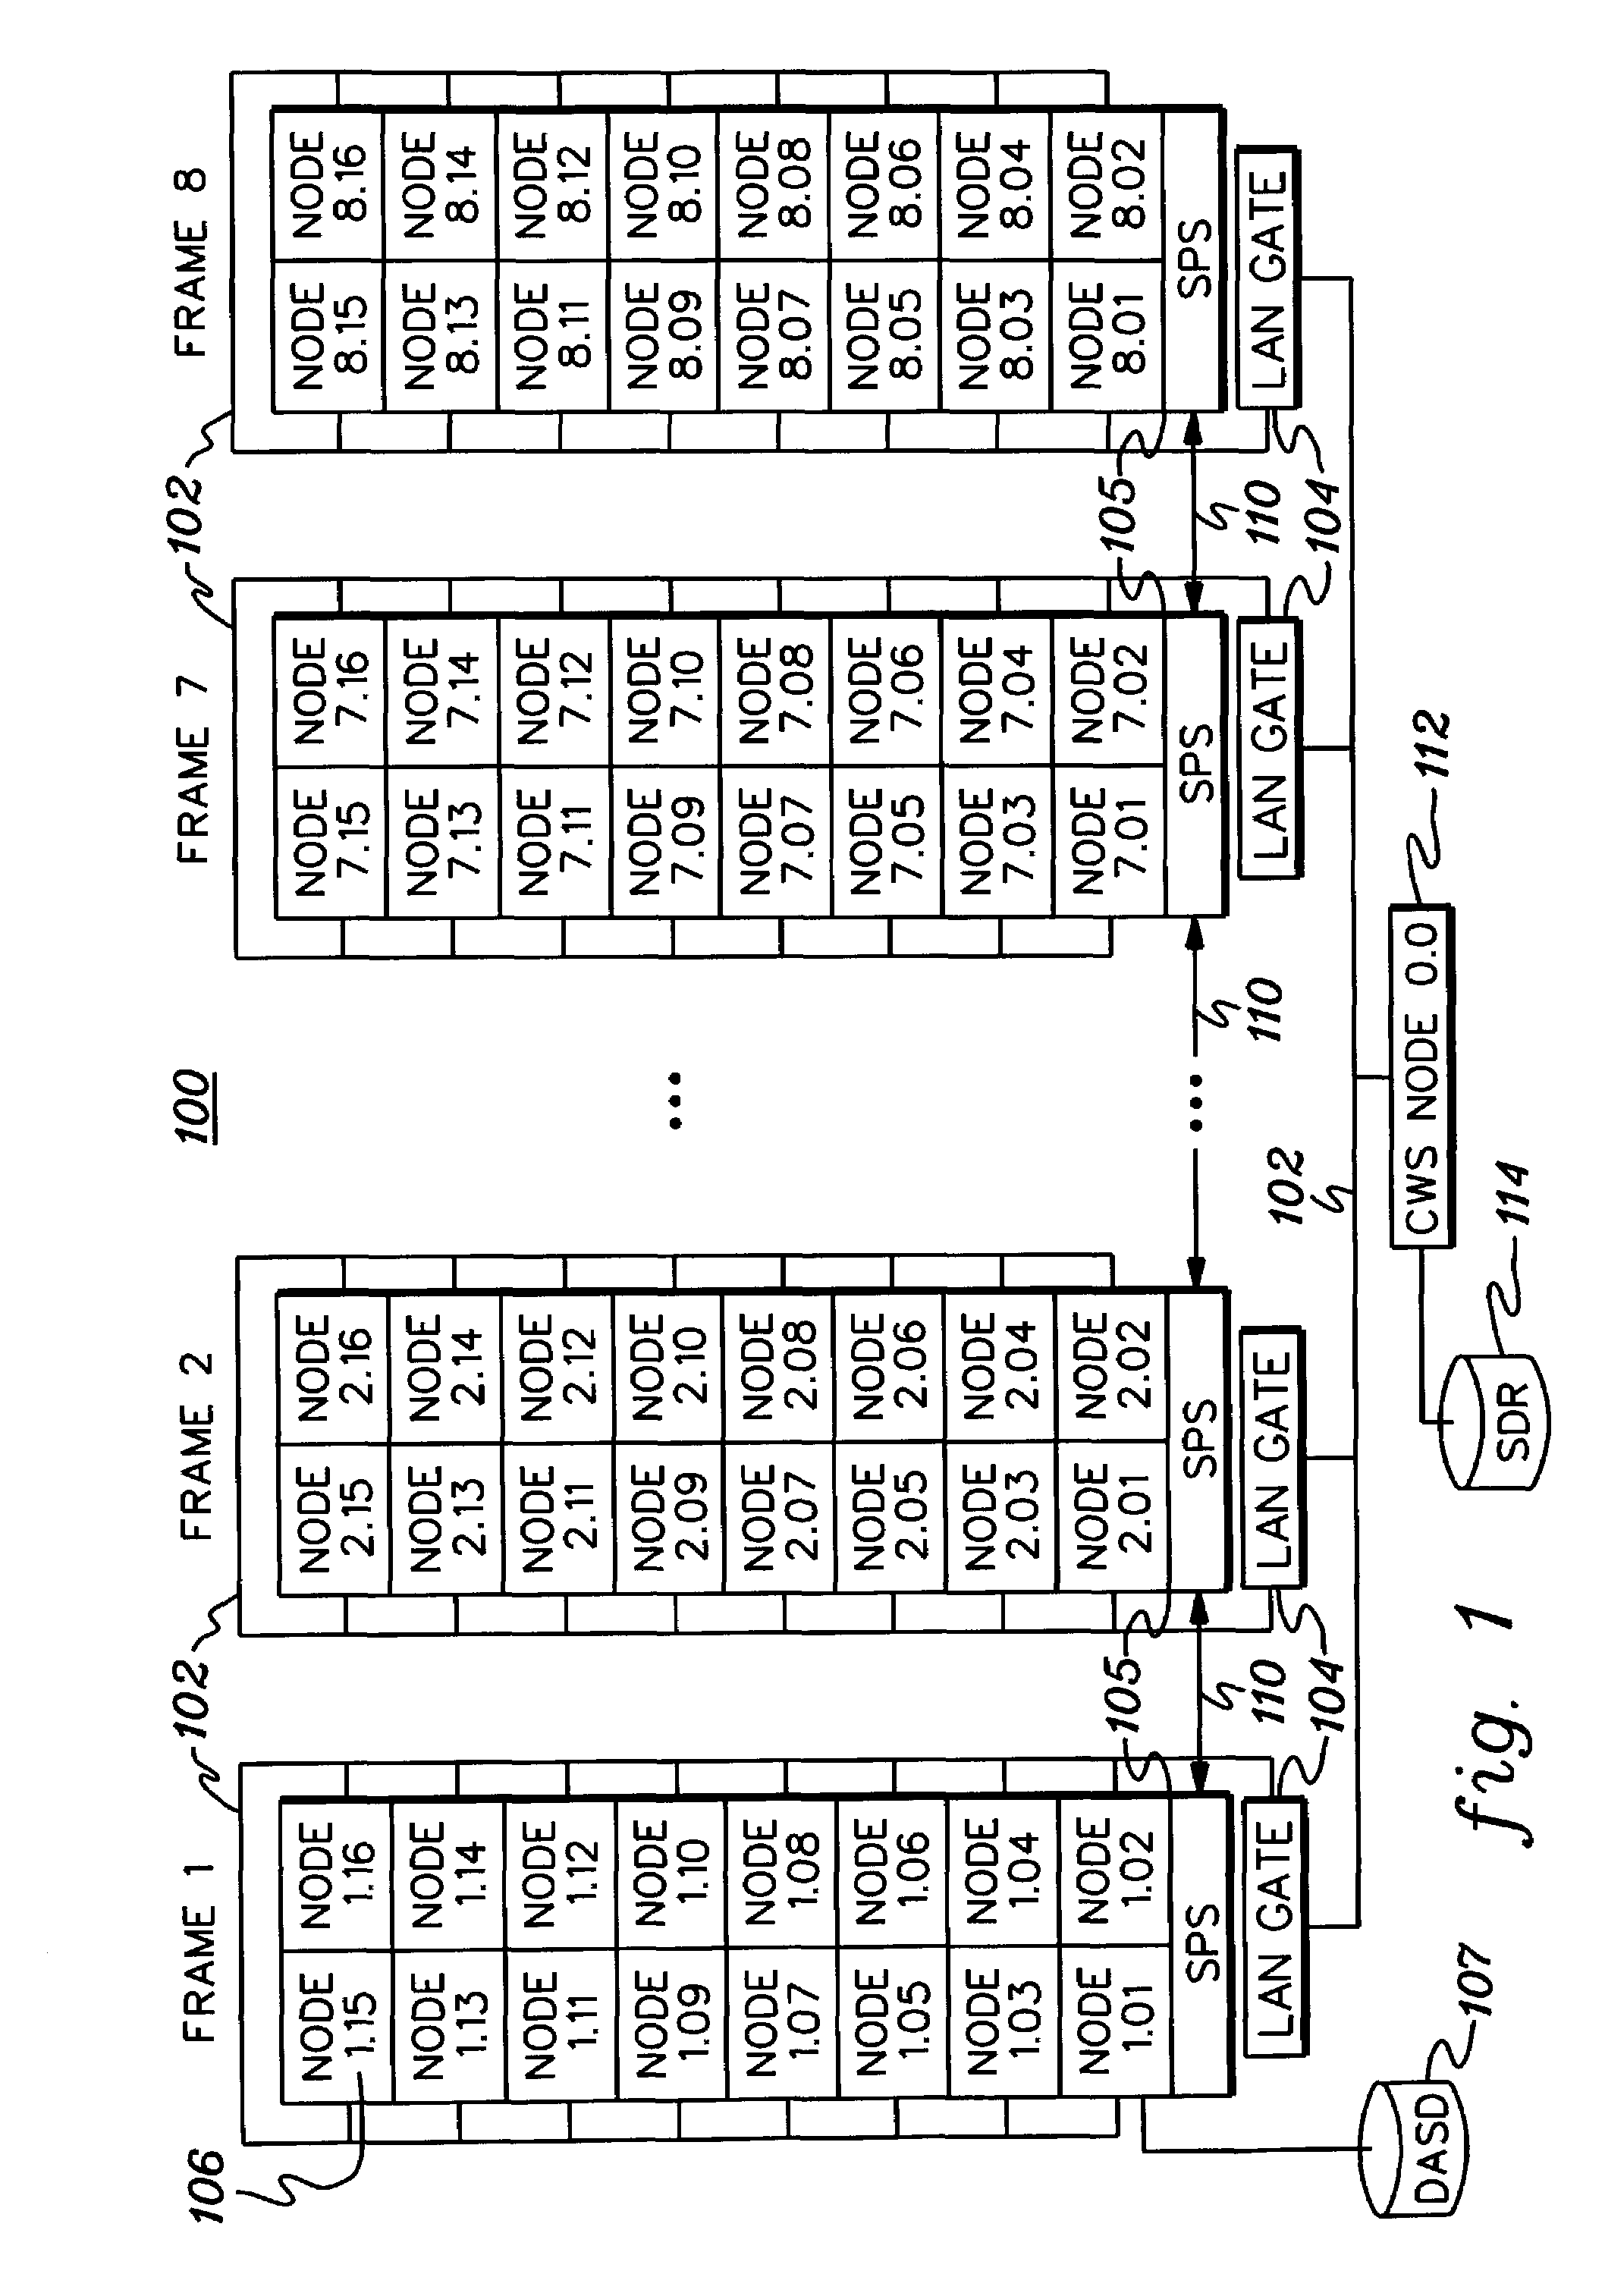 Technique for controlling selection of a peek adapter or a read adapter from multiple adapters connected to a high speed switch